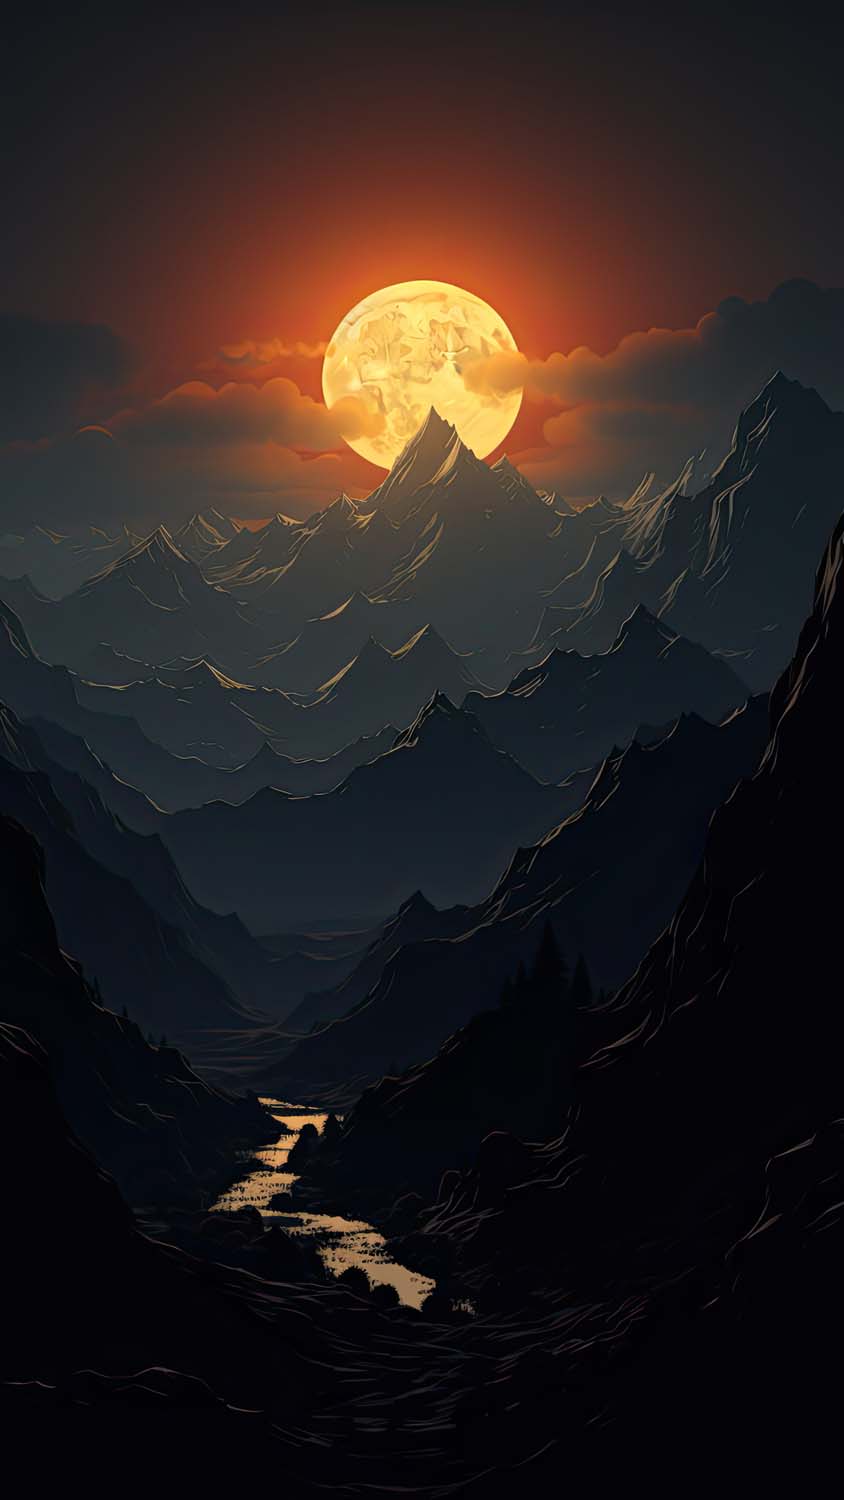 Moon Rise in Mountains iPhone Wallpaper 4K